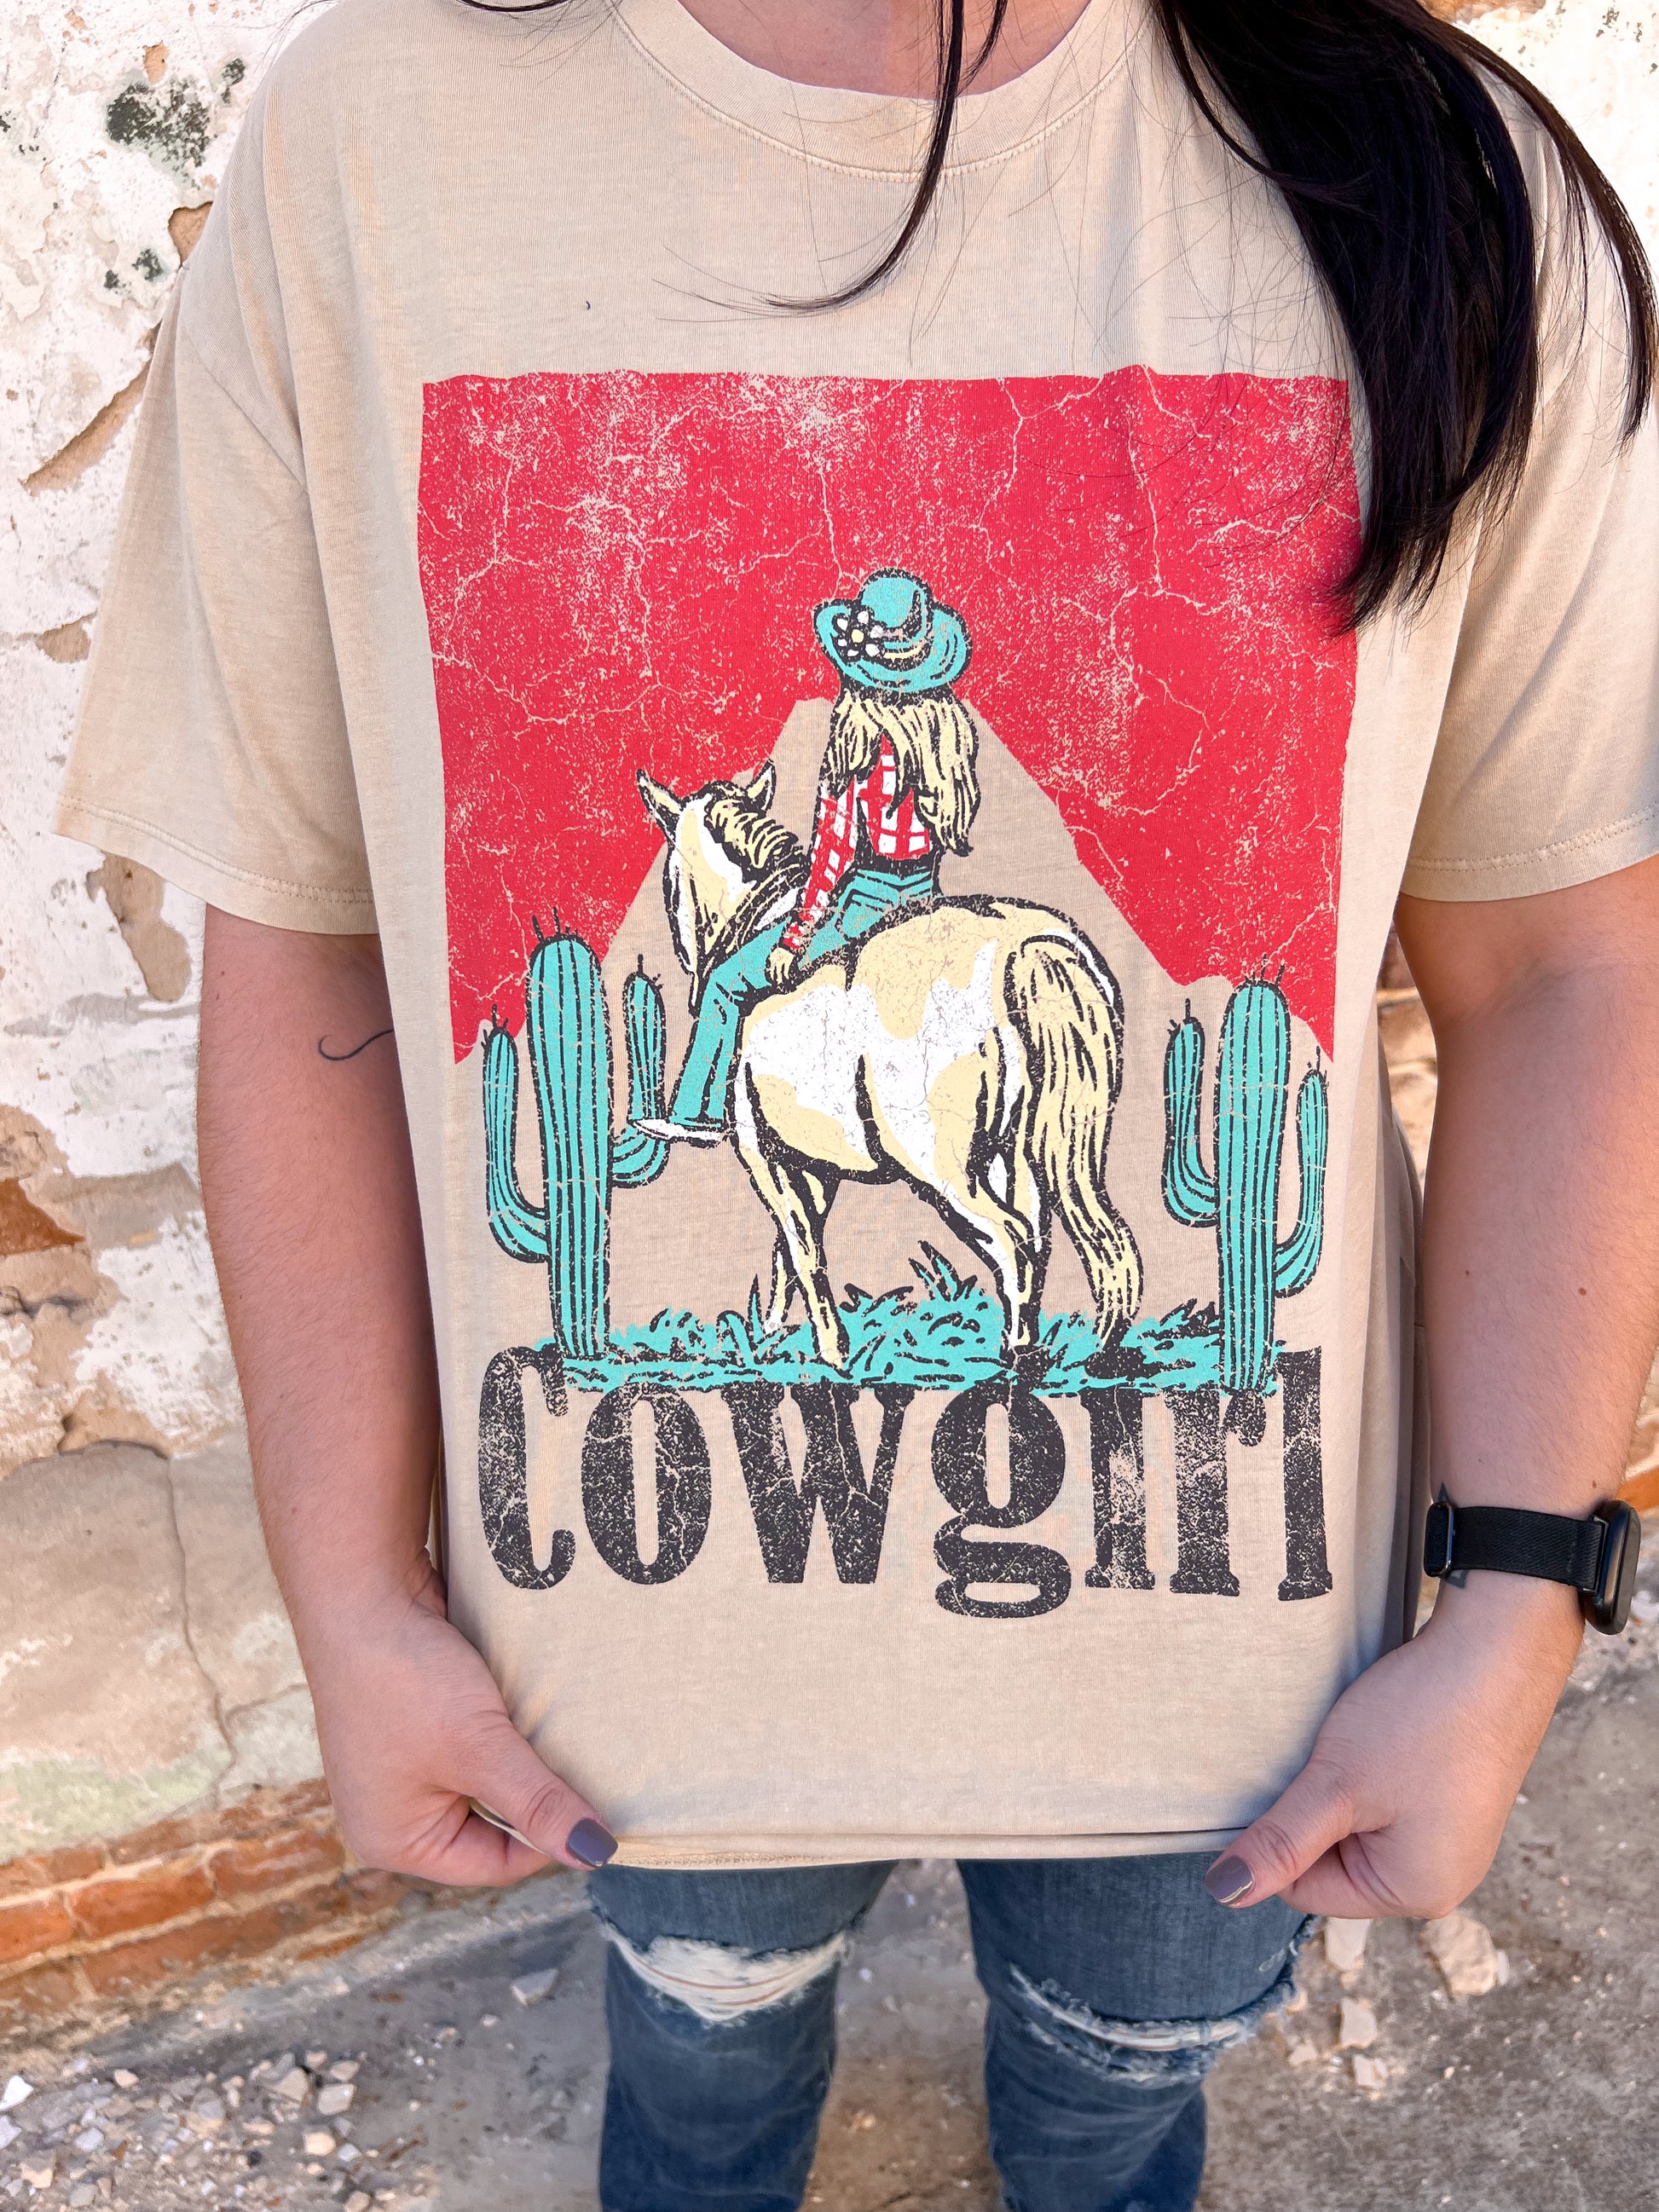 Premium Washed Graphic Cowgirl Top Oversized-Top-tres bien-11/28/23 md, 1st md, 8/22/23-The Twisted Chandelier